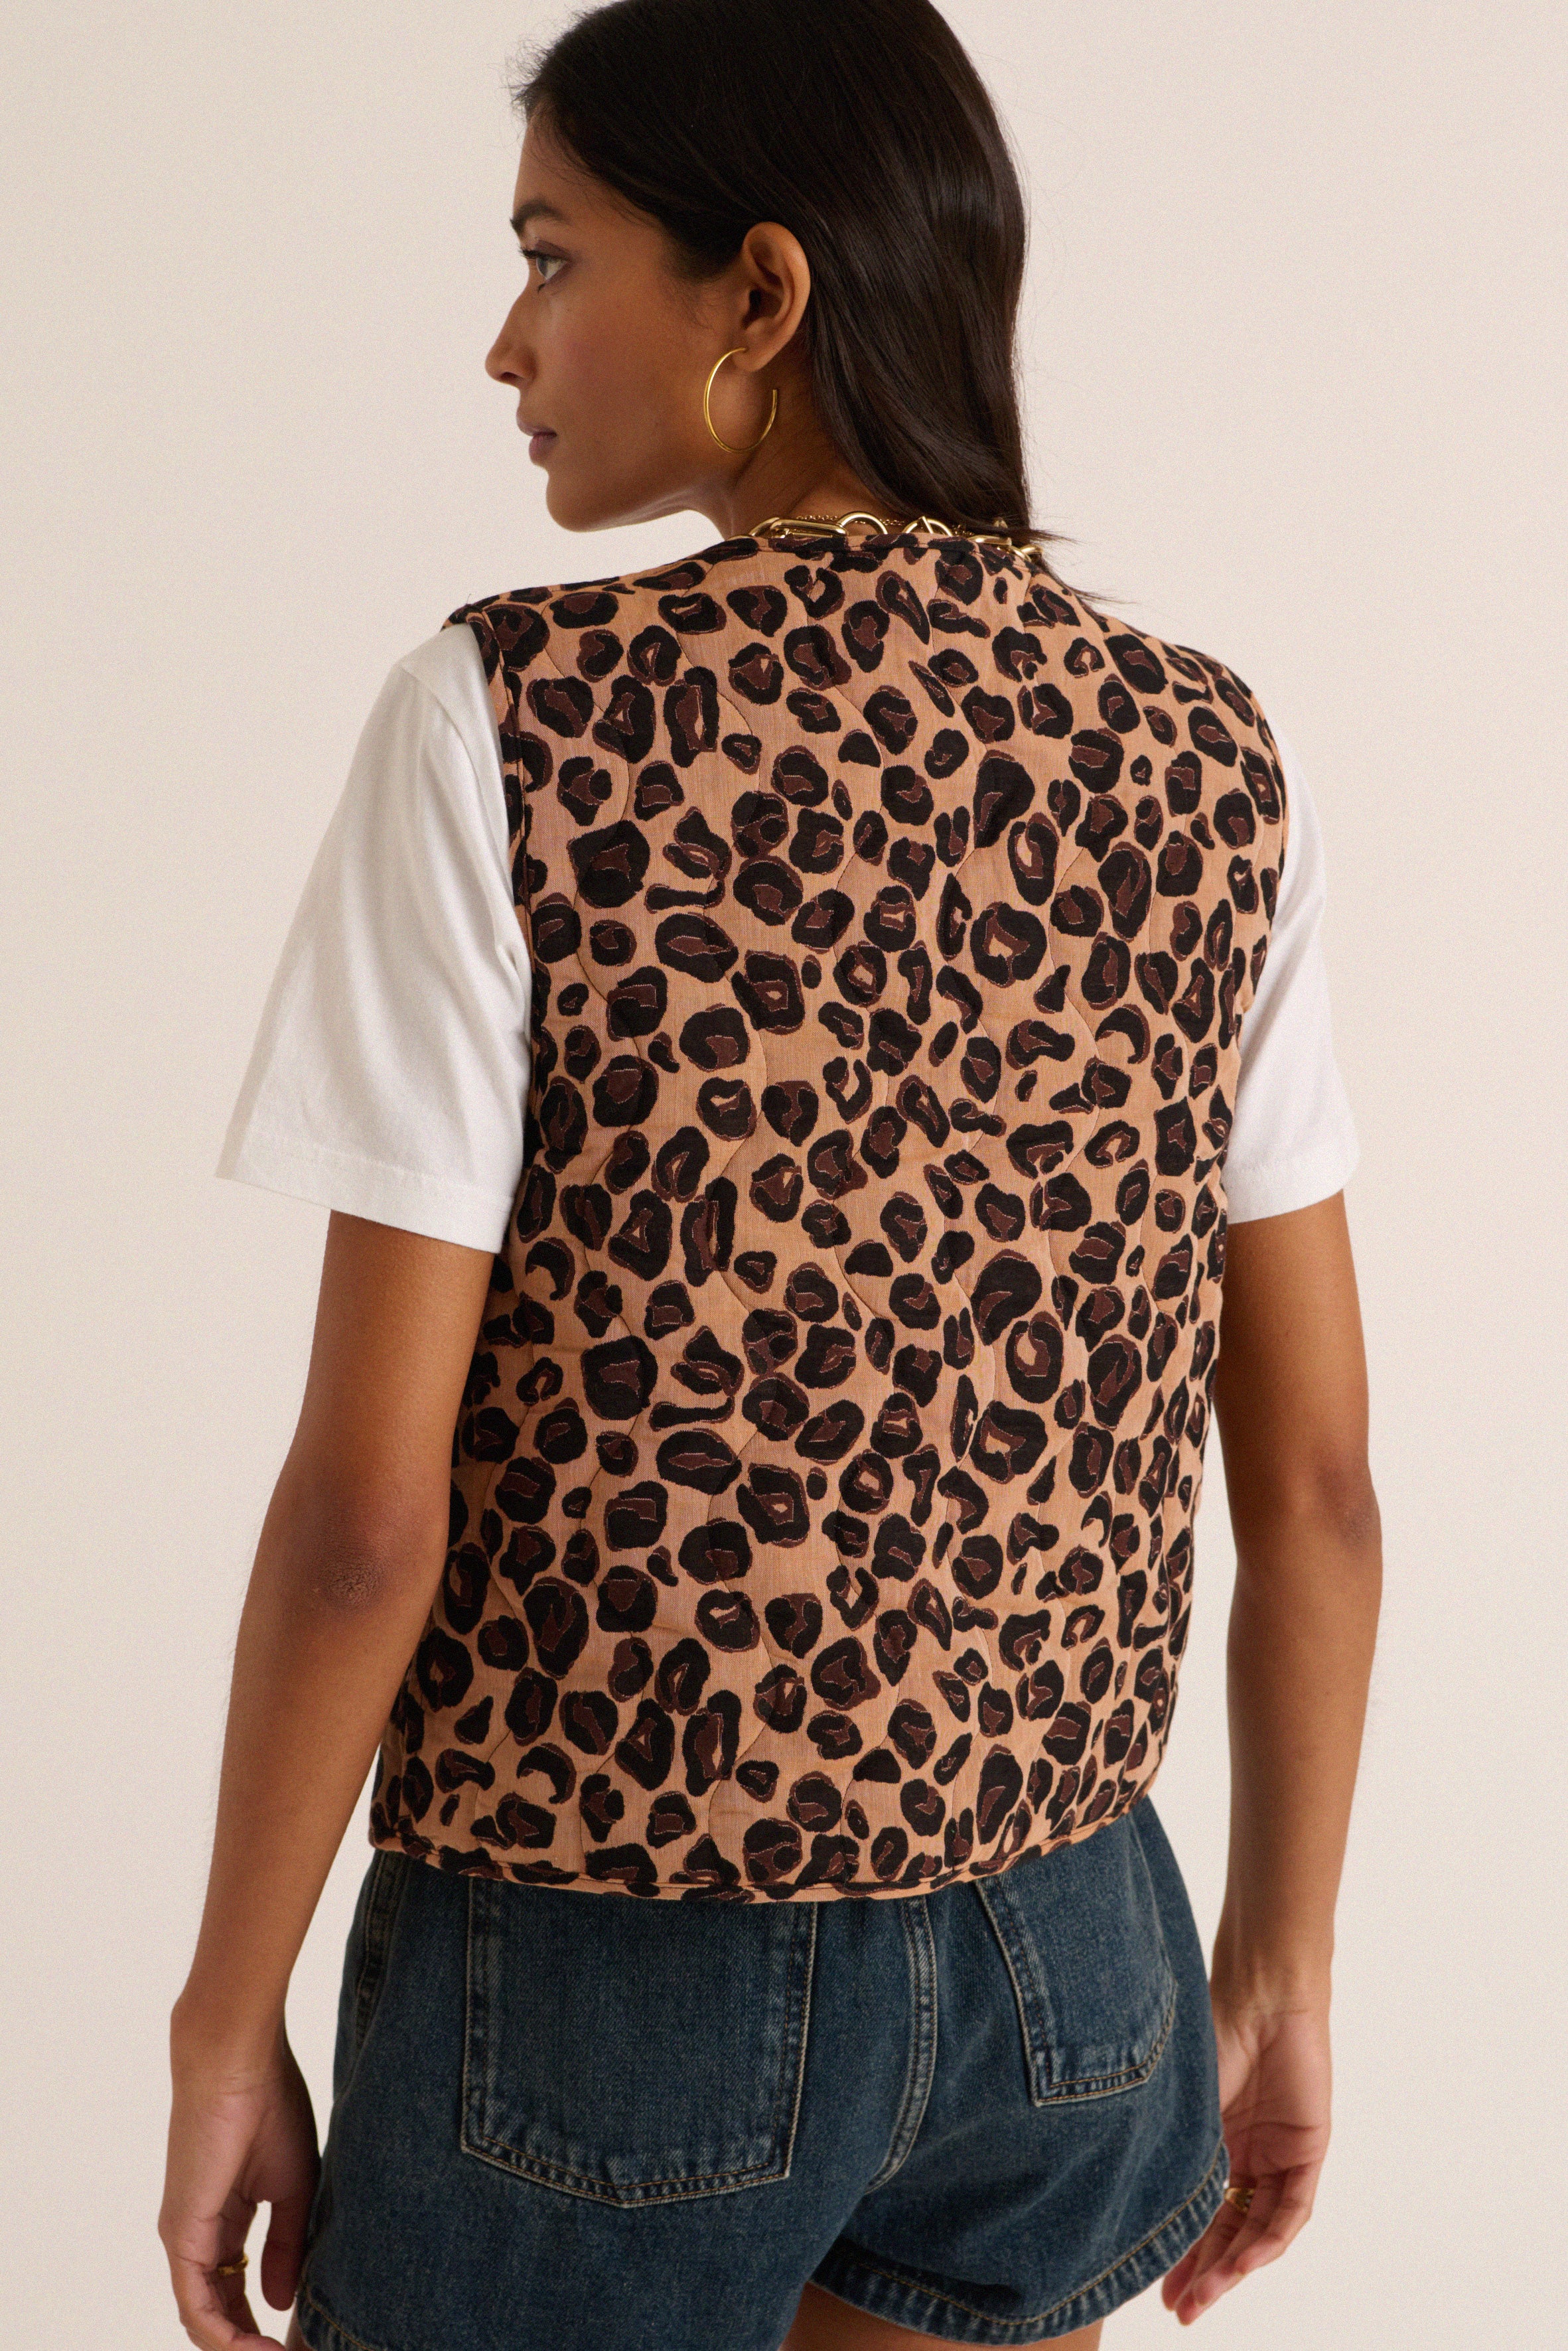 Leopard Shade Vest